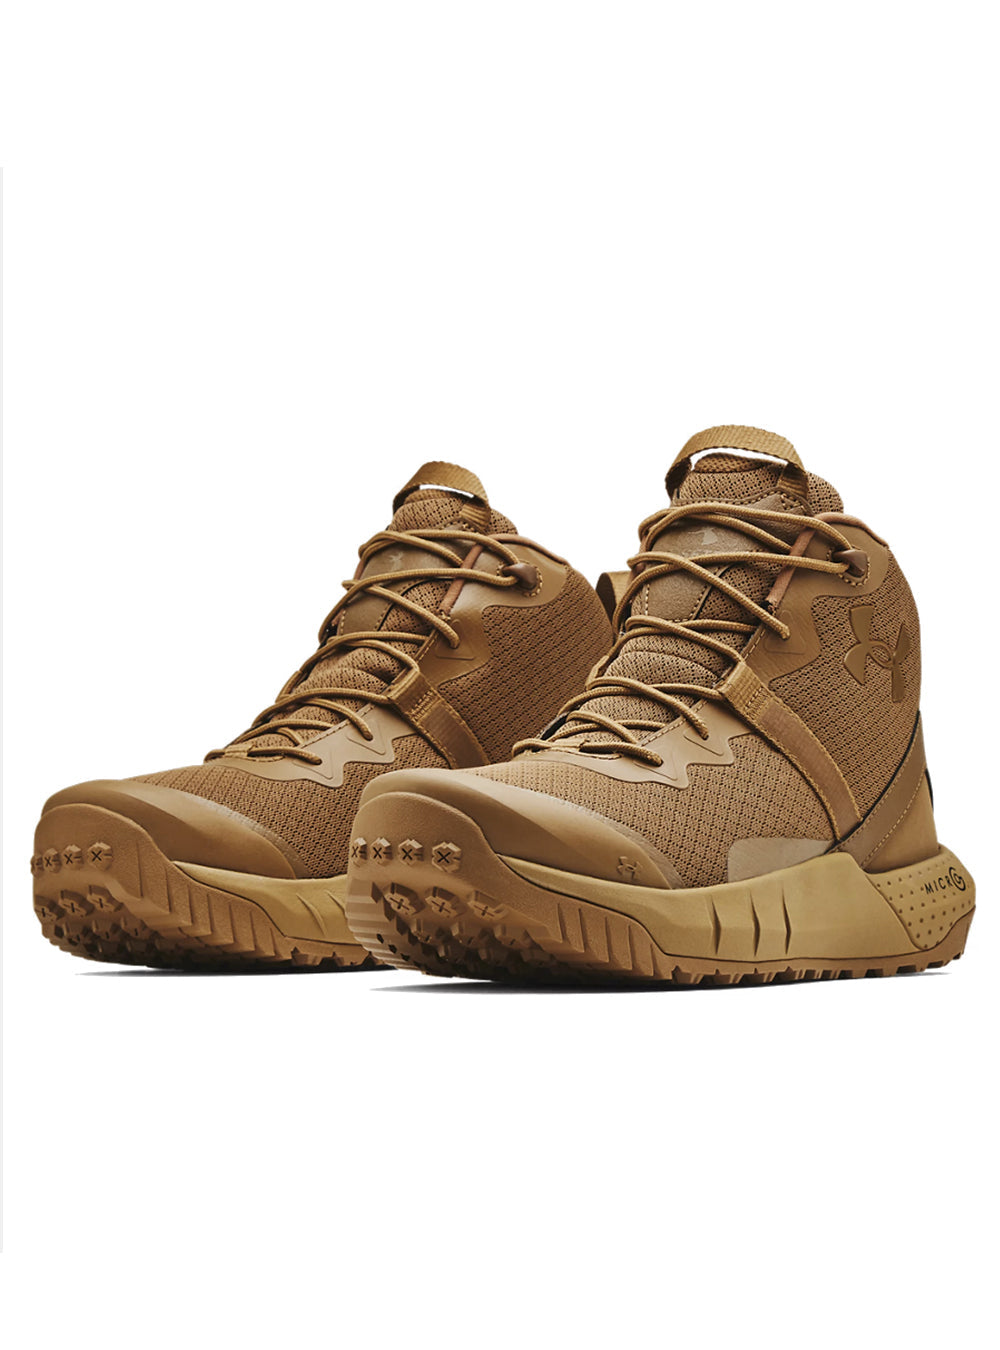 Under Armour Micro G Valsetz Mid - Coyote - TacSource Tactical Gear